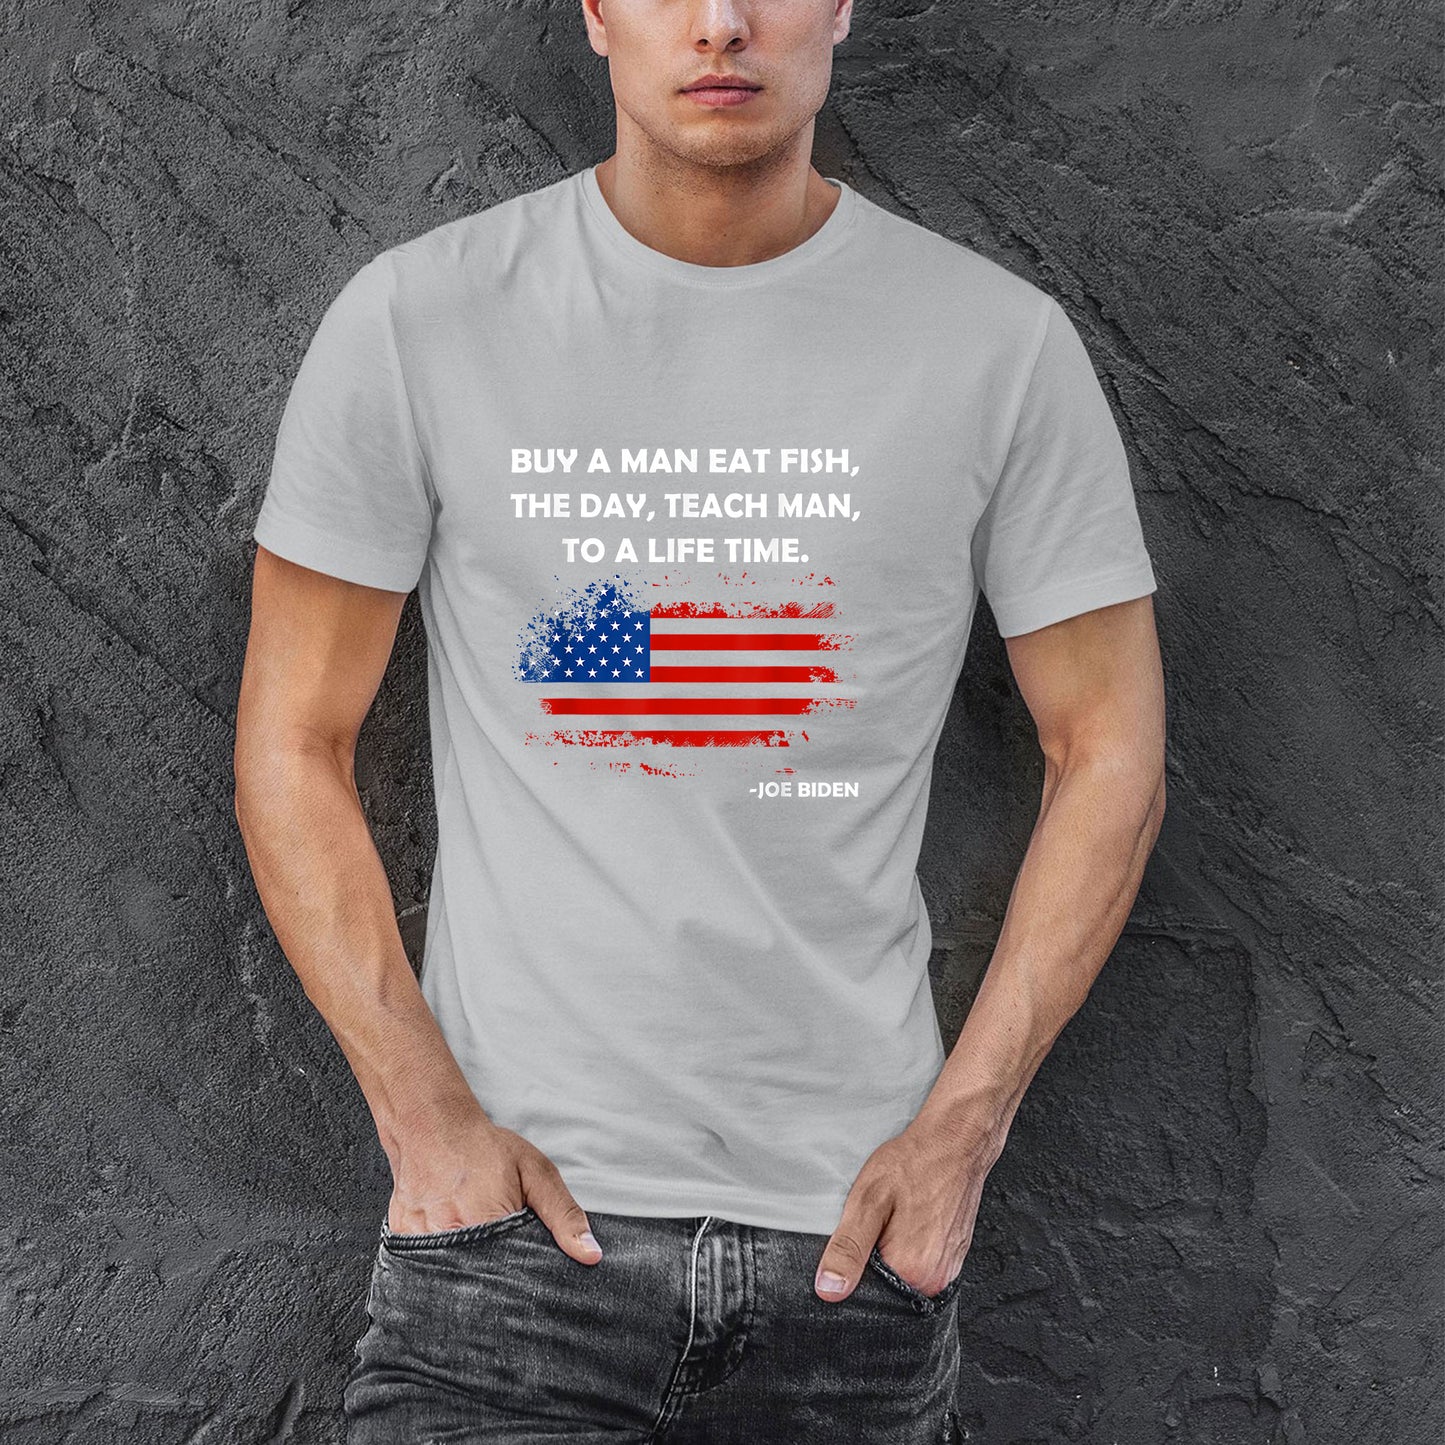 Buy A Man Eat Fish The Day Teach Man To A Life Time Shirt, Joe Biden T Shirt For Men, Great Birthday Gift For Fishermen, Father's Day Gifts For Dad and Grandpa